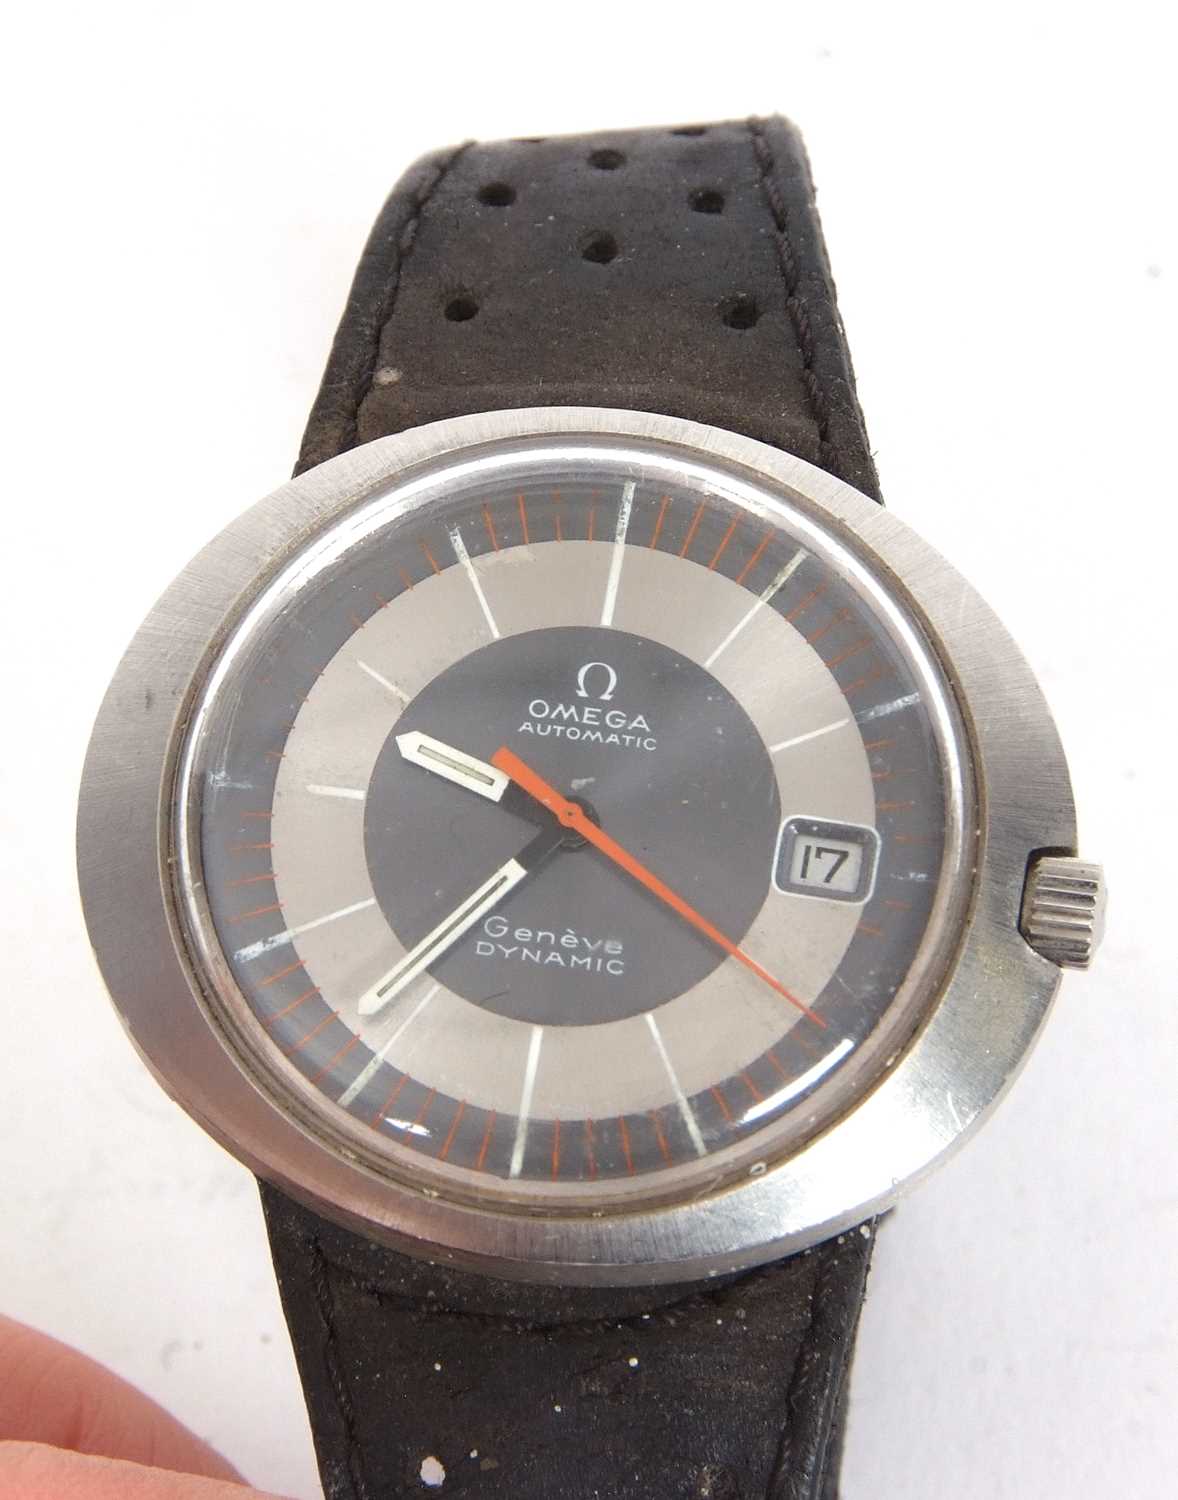 An Omega Geneve Dynamic Automatic wristwatch, the watch has a stainless steel case and two tone dial - Image 6 of 7